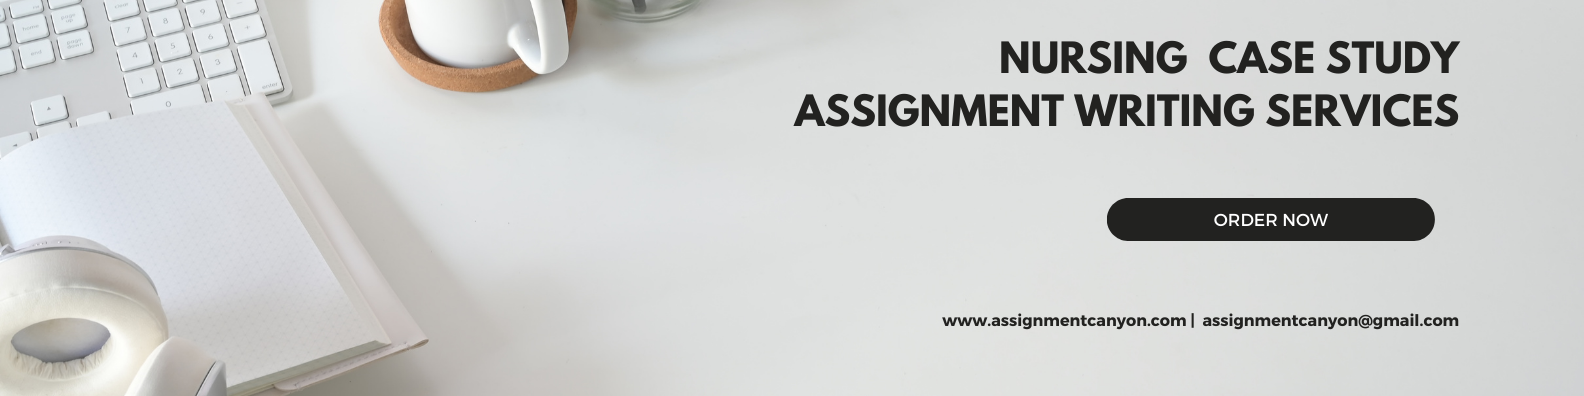 Assignment Canyon offers Affordable Nursing Case Study Assignment Writing Services